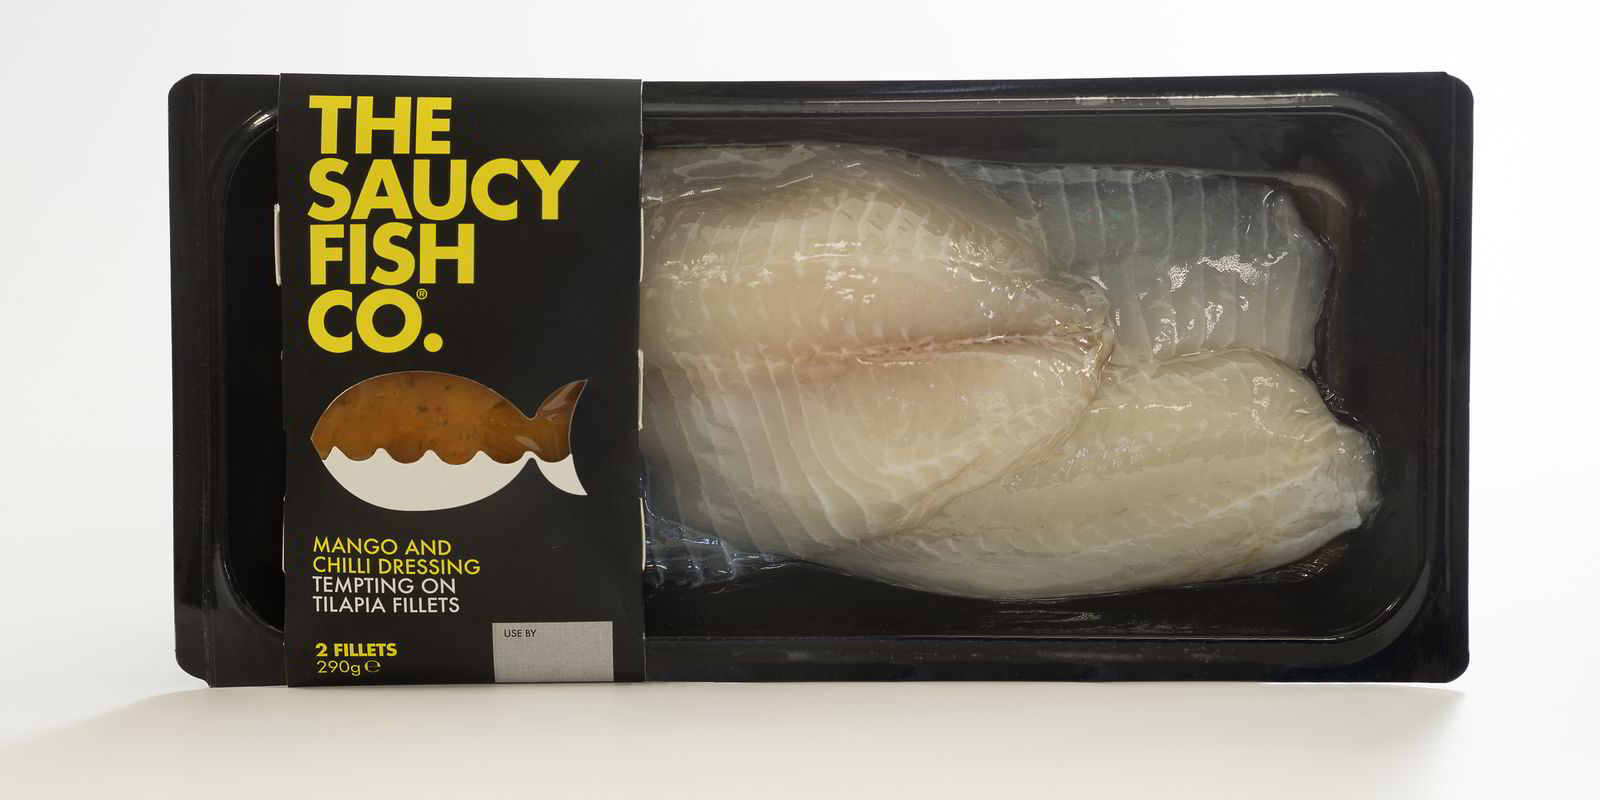 Saucy Fish to battle Aldi in courts over 'copycat' product